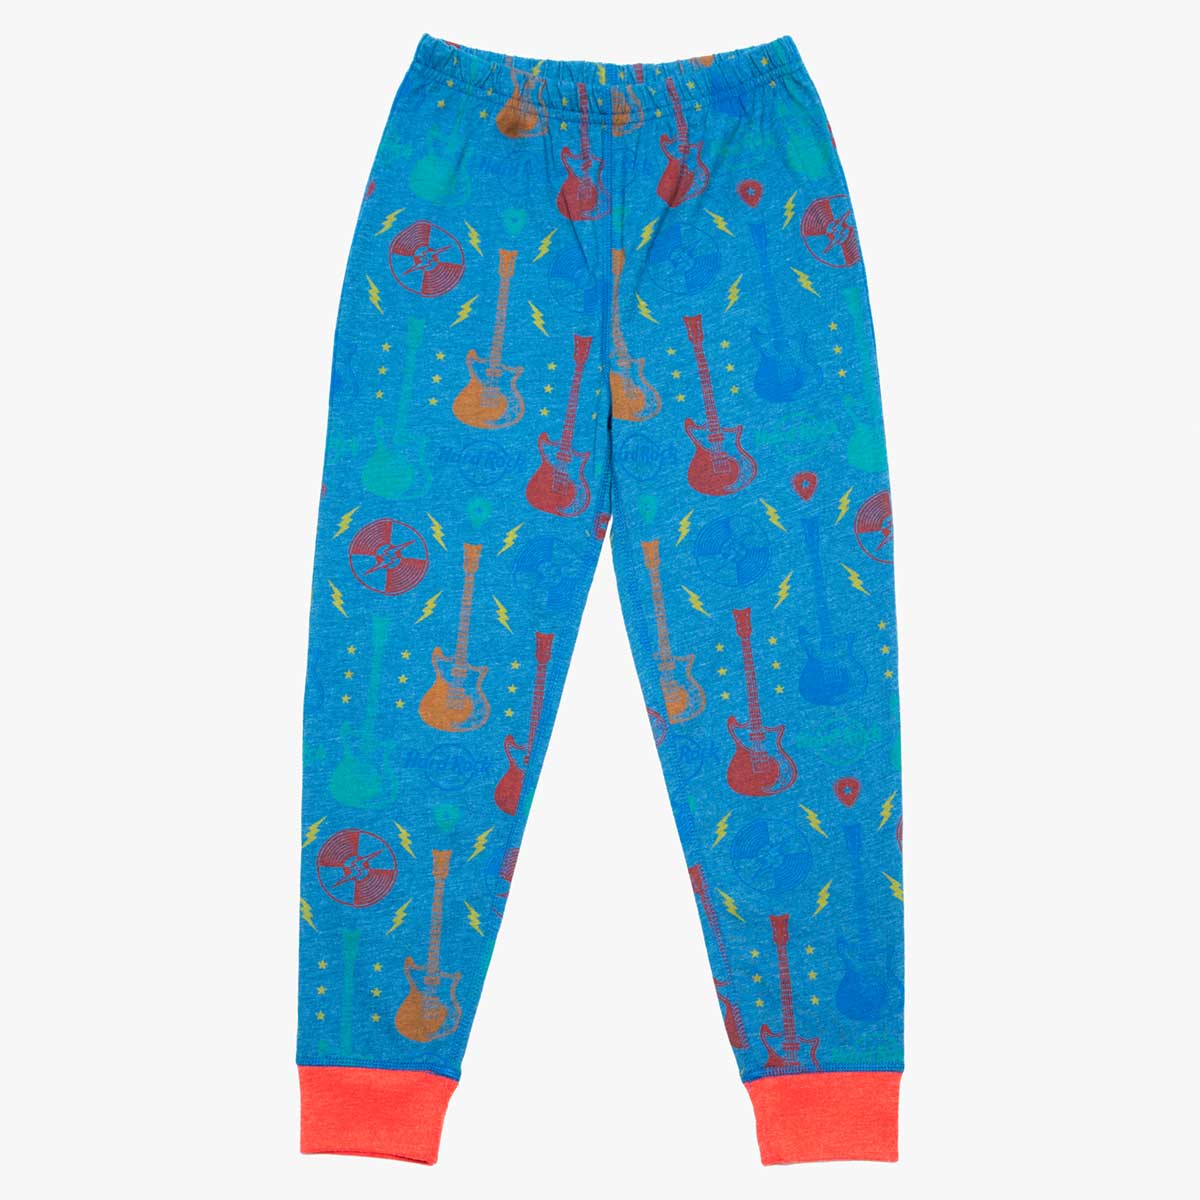 Cozy Holiday Youth Pajama Set in Blue Guitars Print image number 4